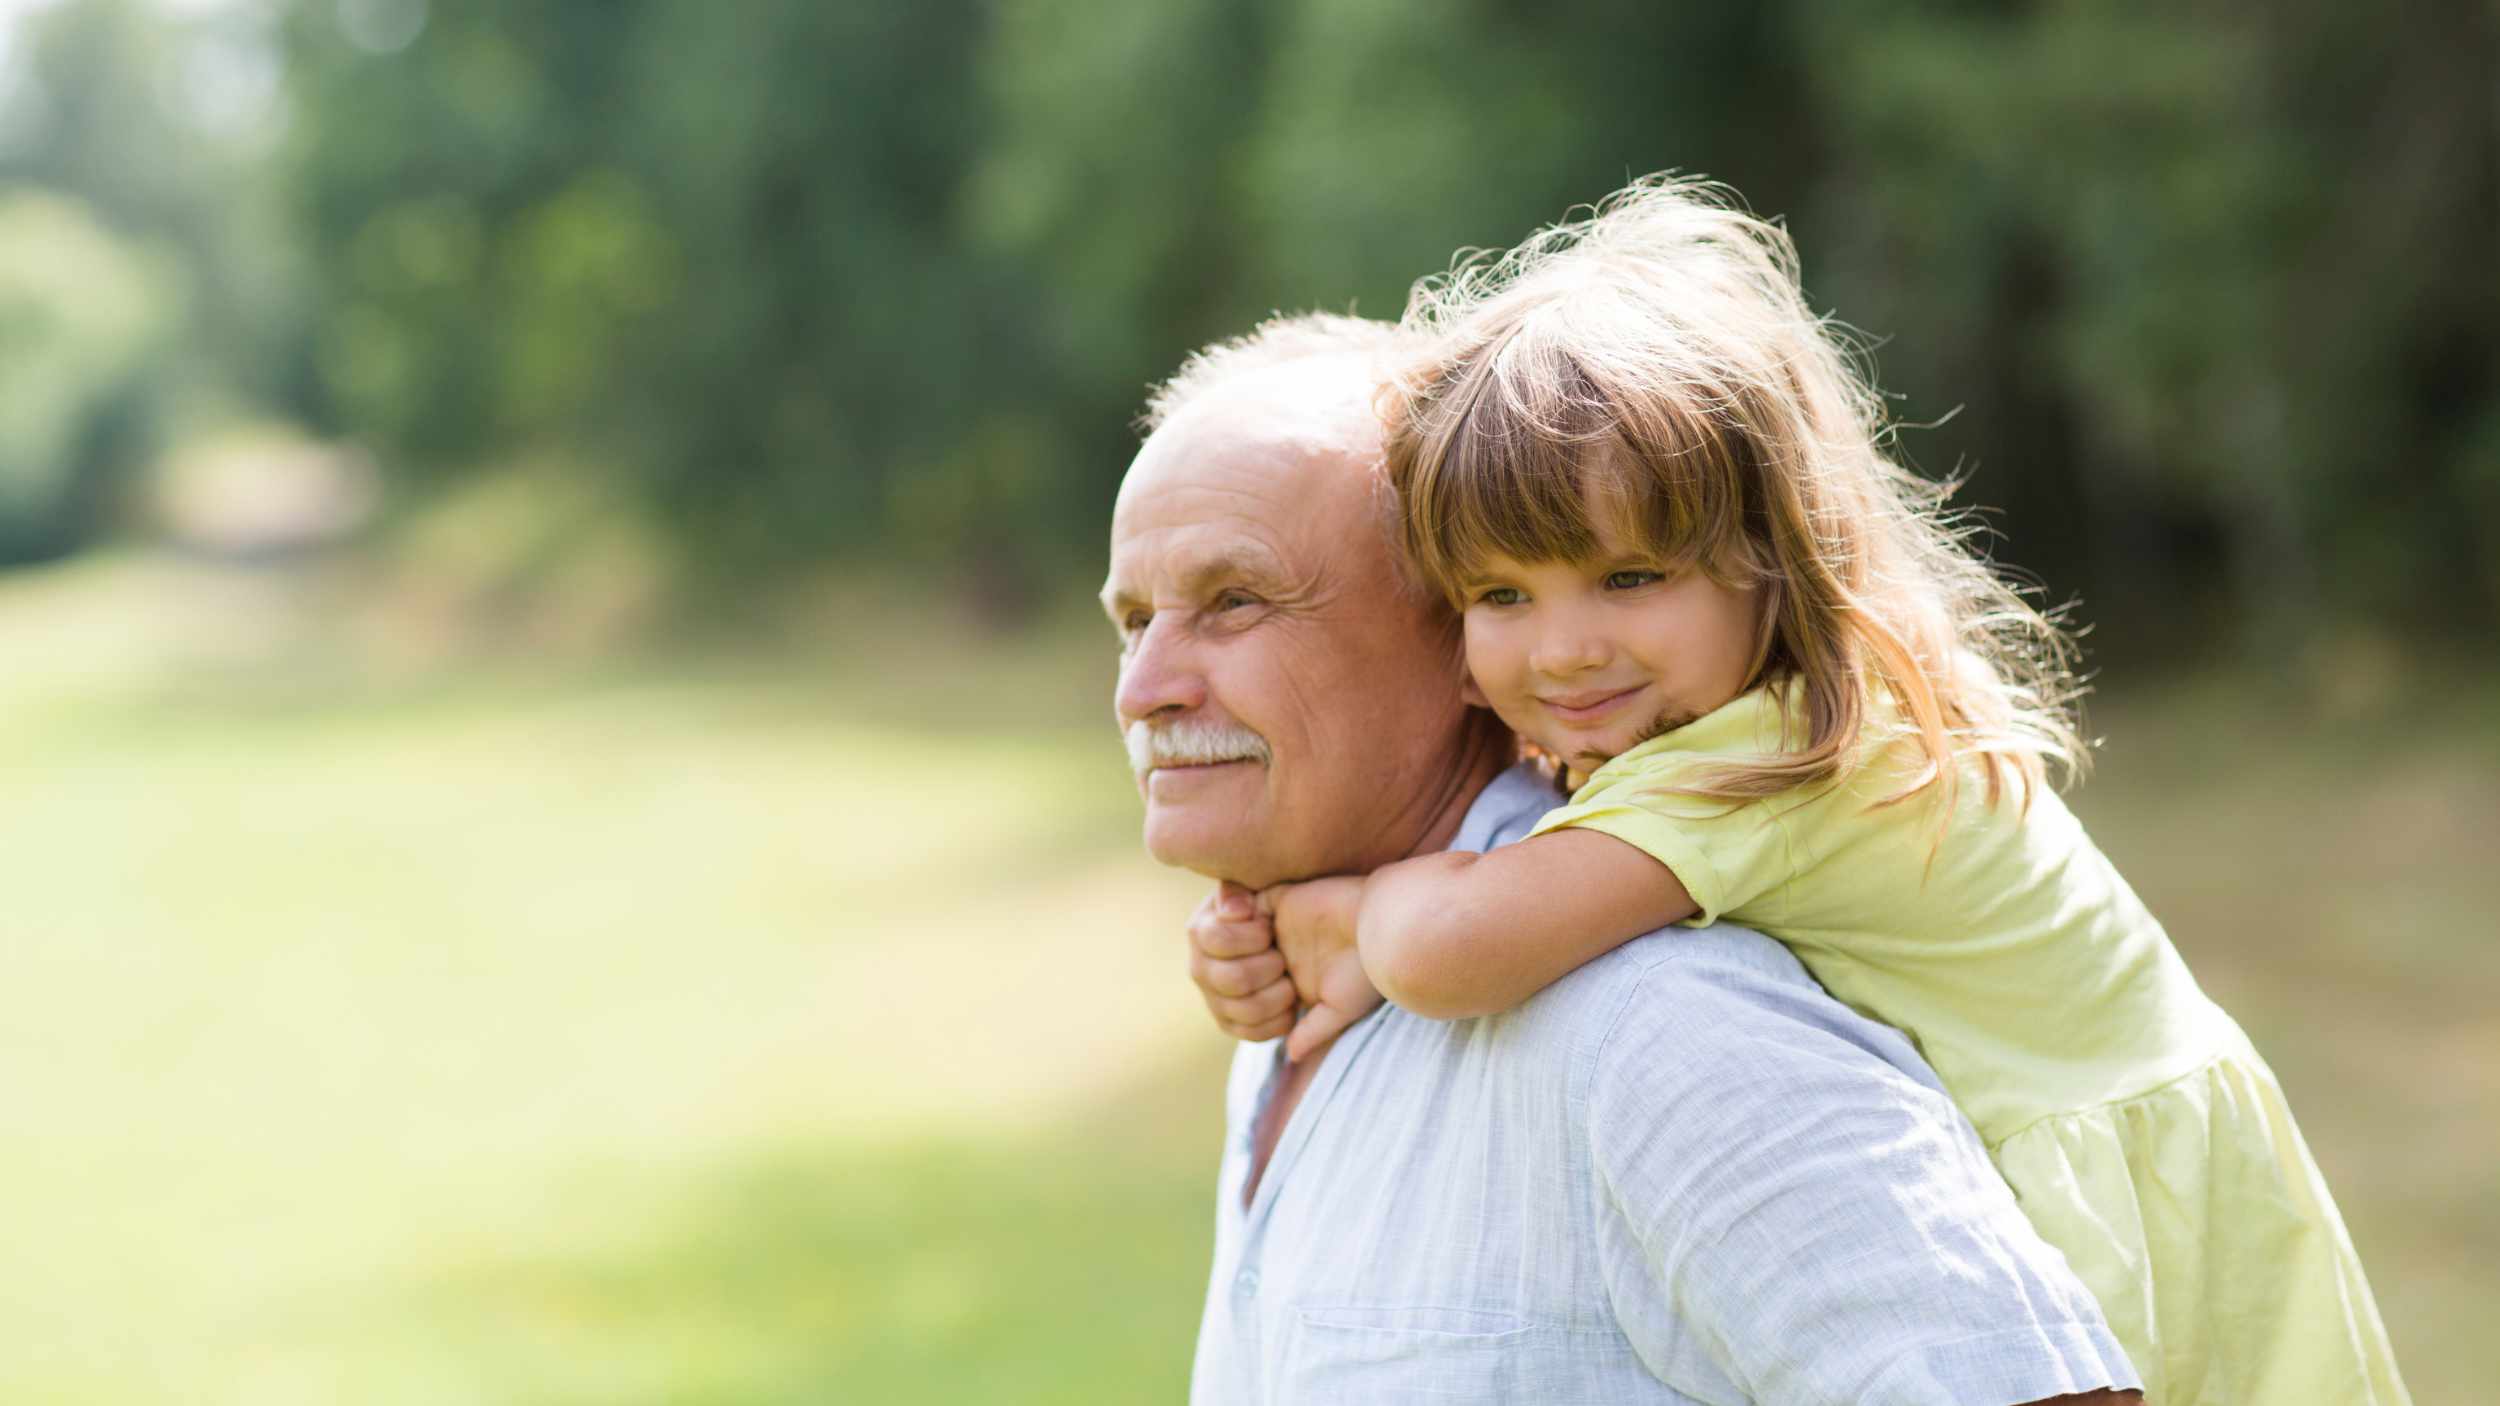 Little child girl hugs grandpa On Walk in the summer outdoors. Concept of friendly family.